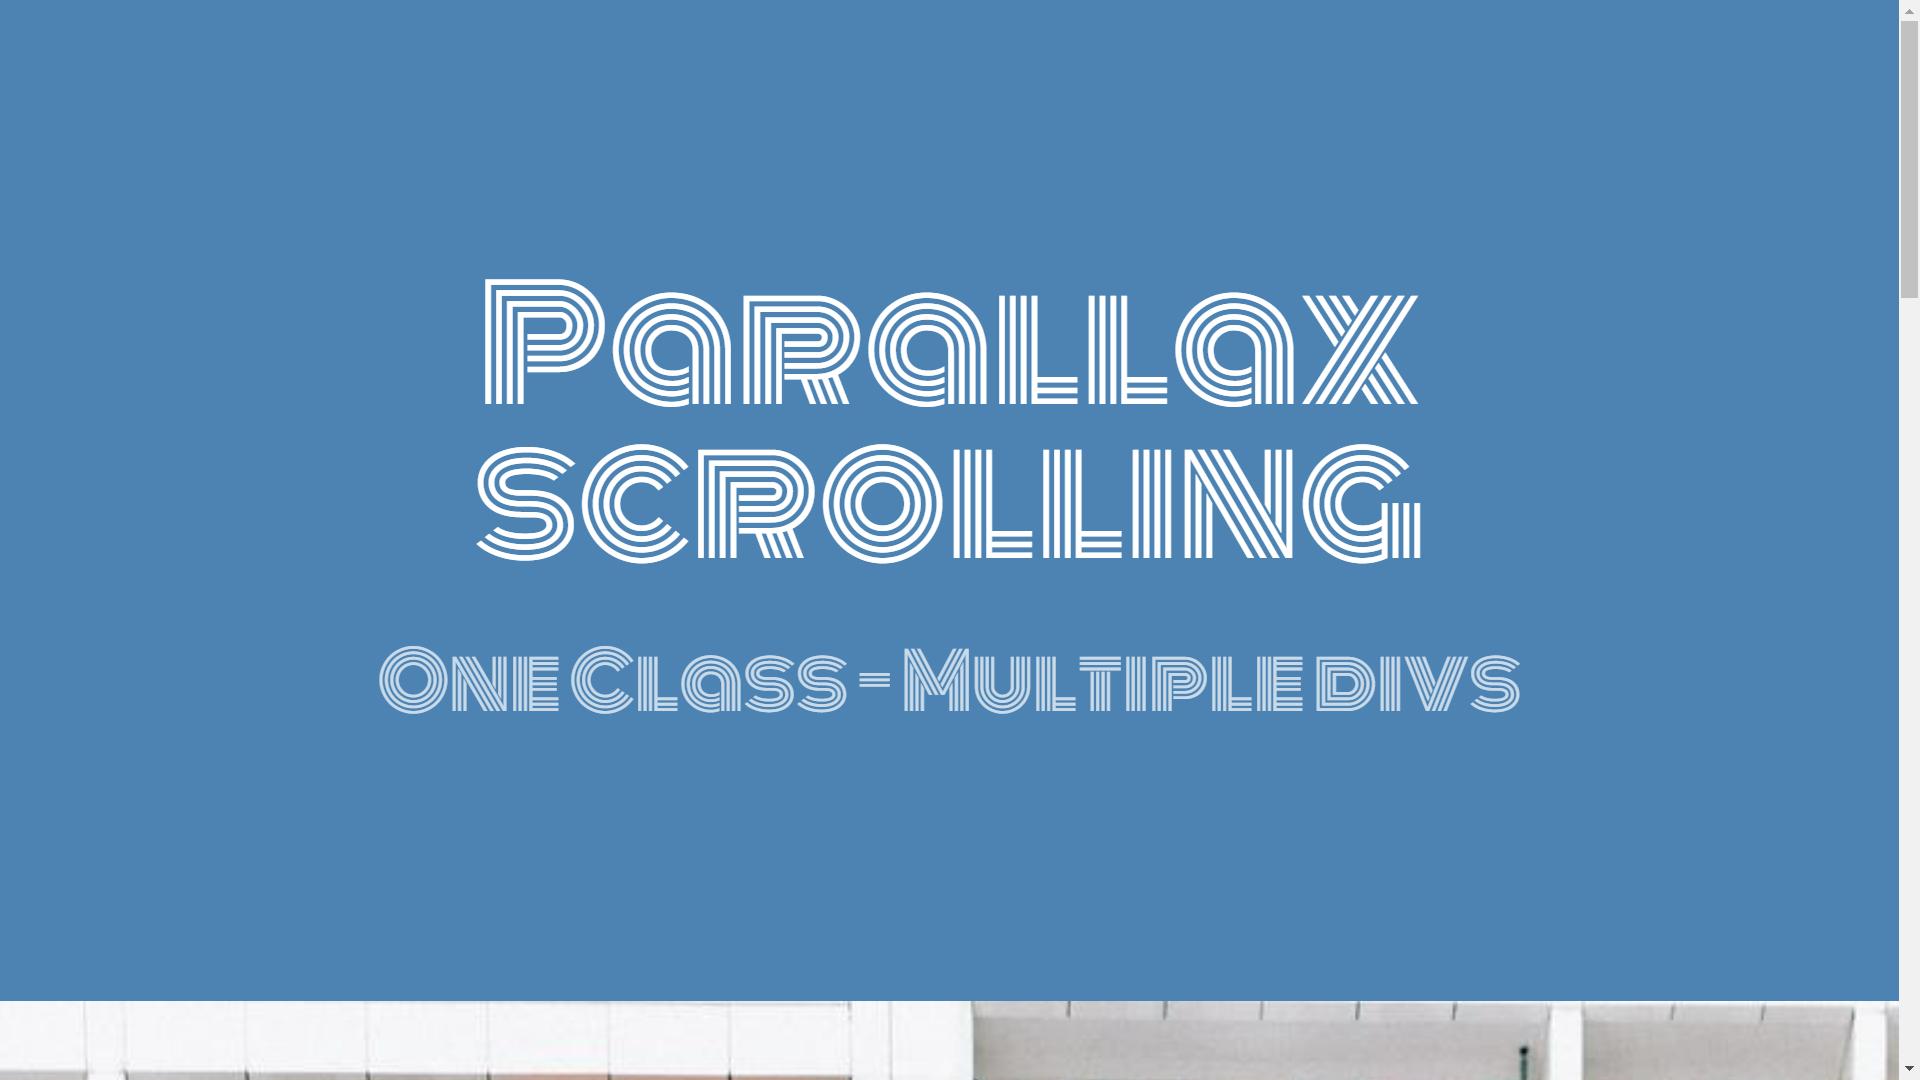 Parallax Scrolling With One Class and Multiple DIVs